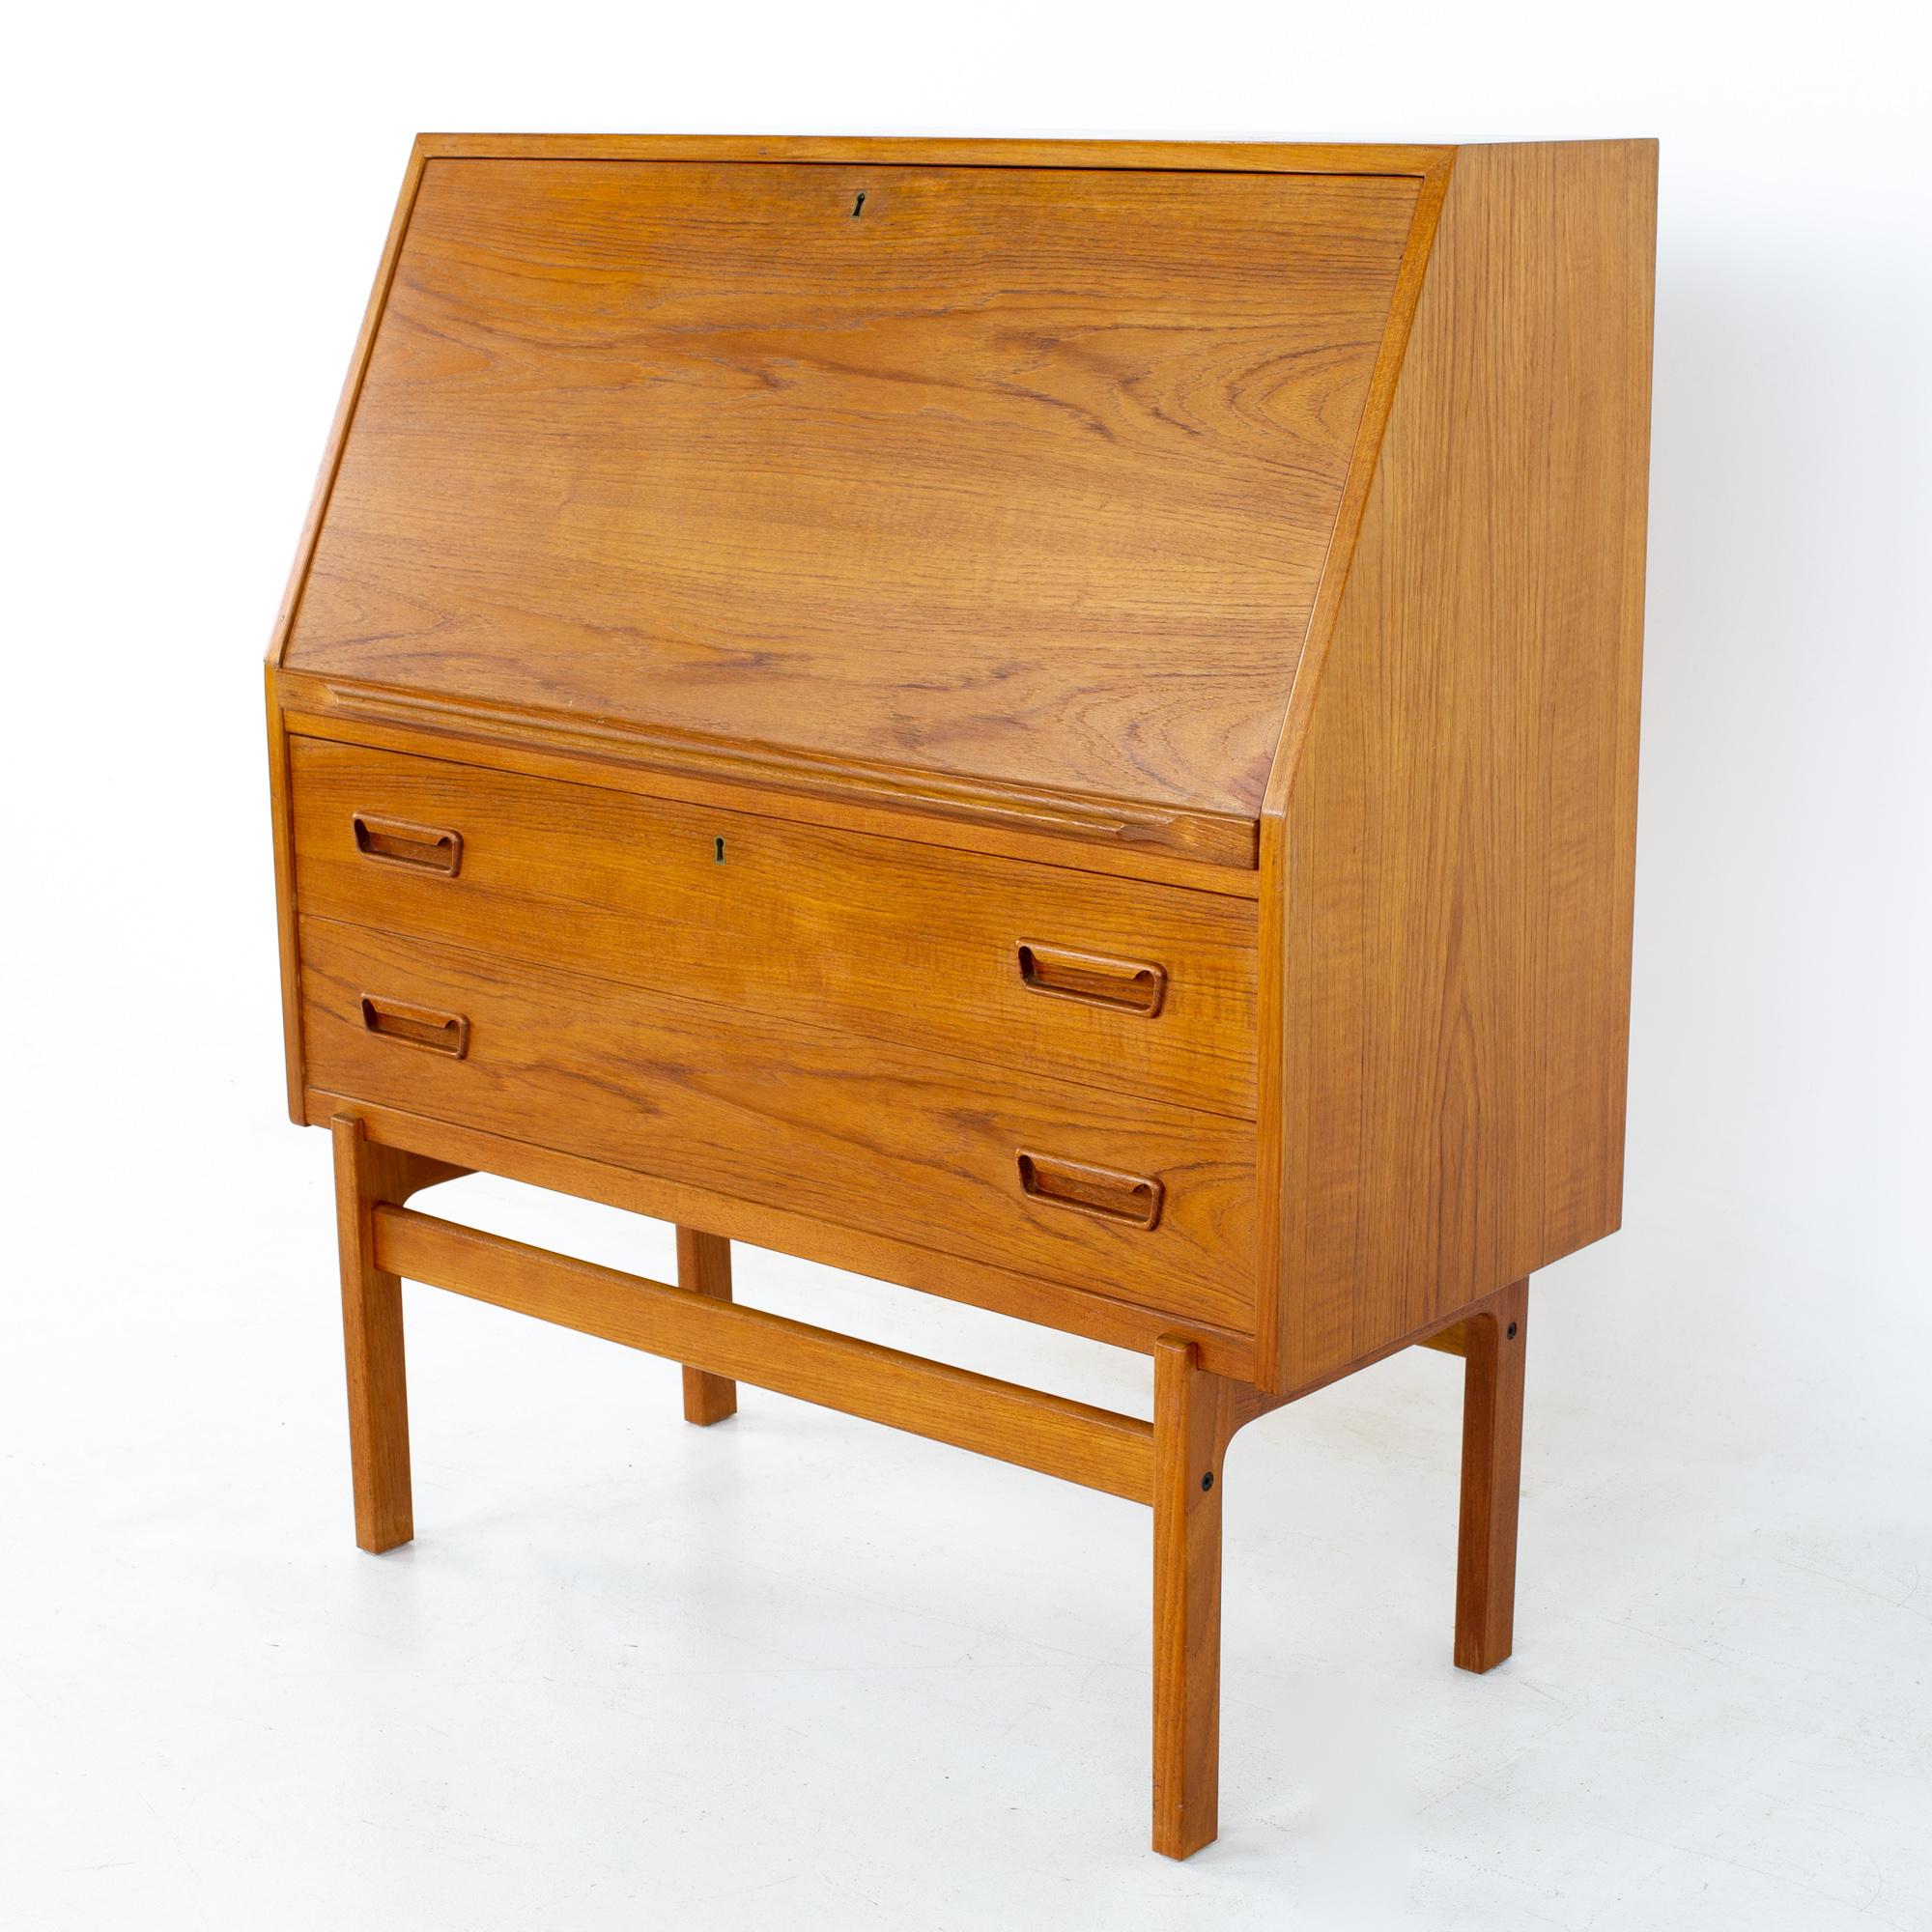 Arne Wahl Iversen Model 68 mid century Danish teak drop front secretary bar desk
Desk measures: 37.5 wide x 17.5 deep x 33.5 inches high

All pieces of furniture can be had in what we call restored vintage condition. That means the piece is